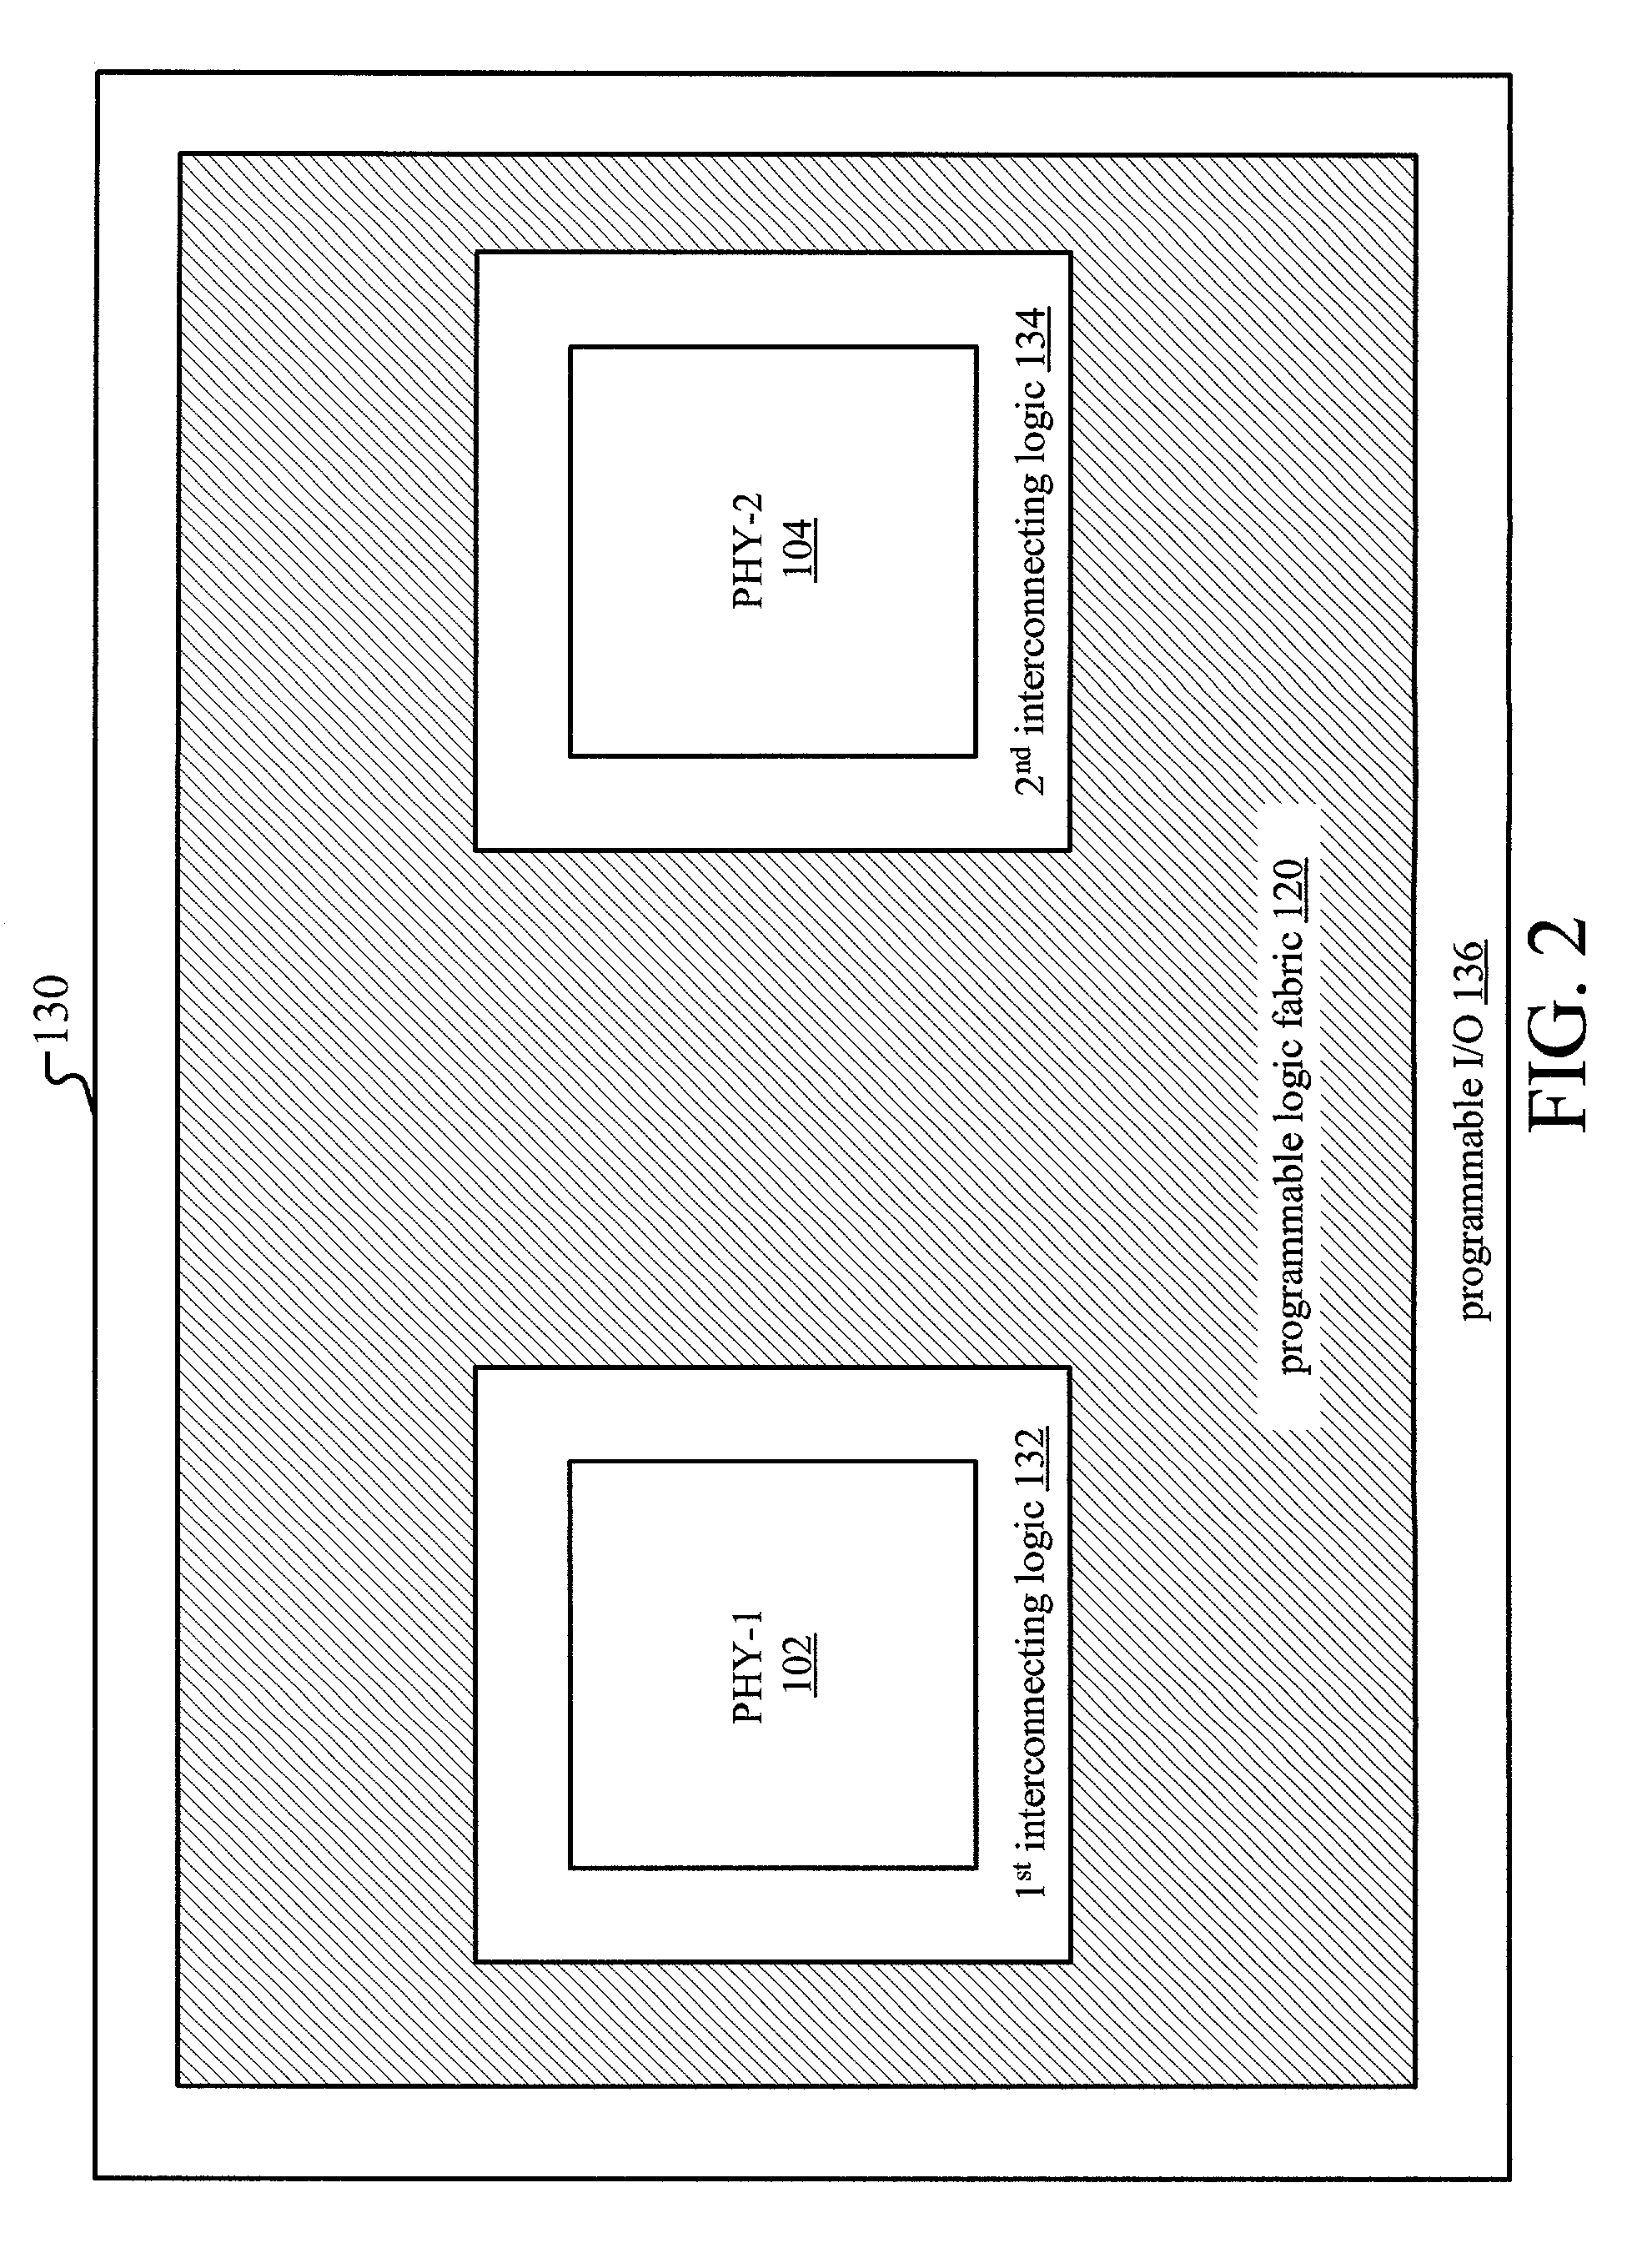 Programmable logic device for wireless local area network